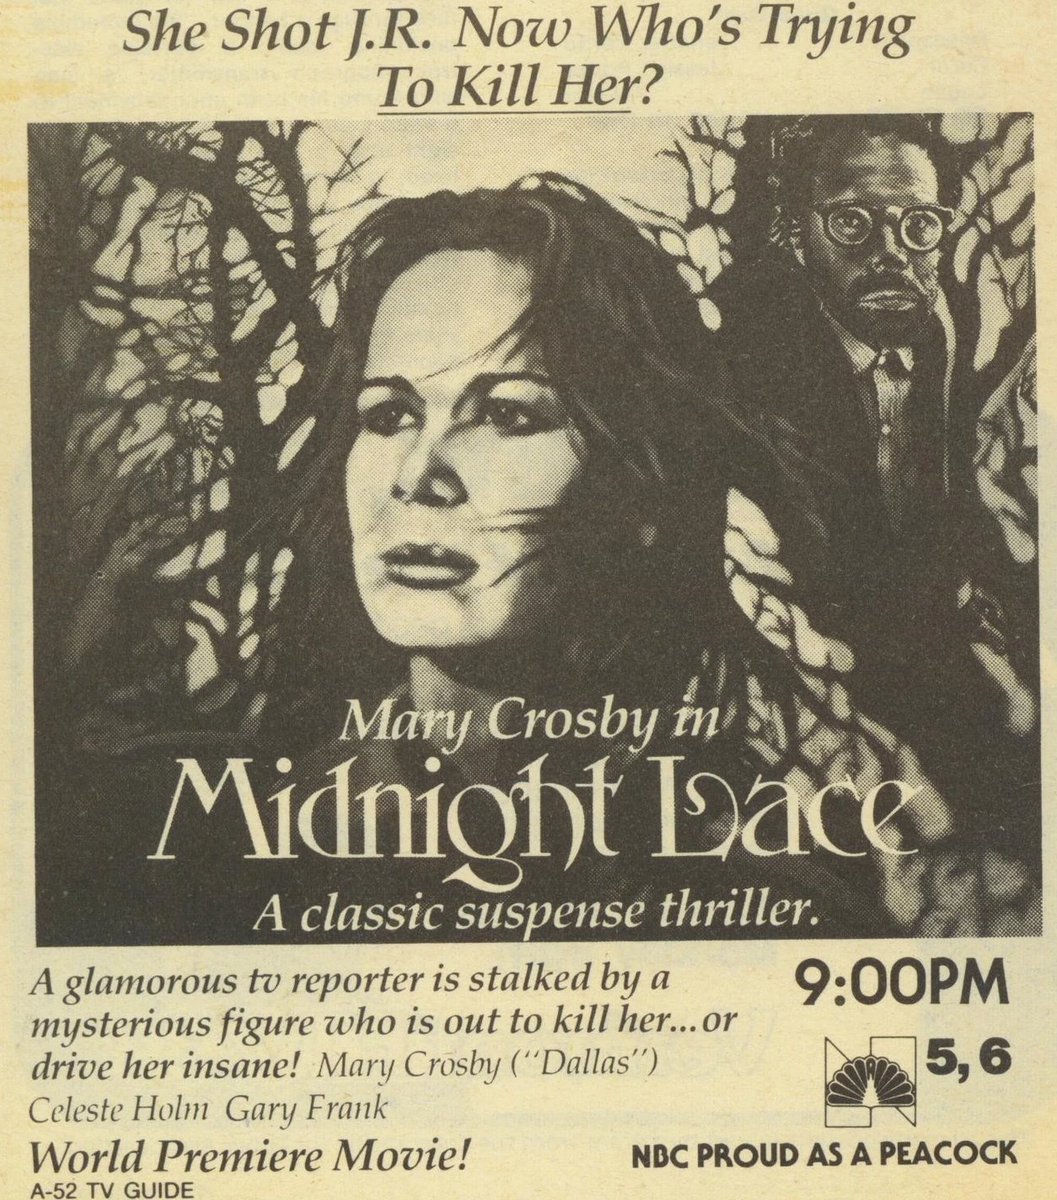 Midnight Lace is totally making good use of Mary Crosby's notoriety as the woman who shot J.R. This TV Guide ad tagline is excellent! Midnight Lace is on YT. Grab a bowl of popcorn and sit back, this one does all the driving for you! (2 of 2)